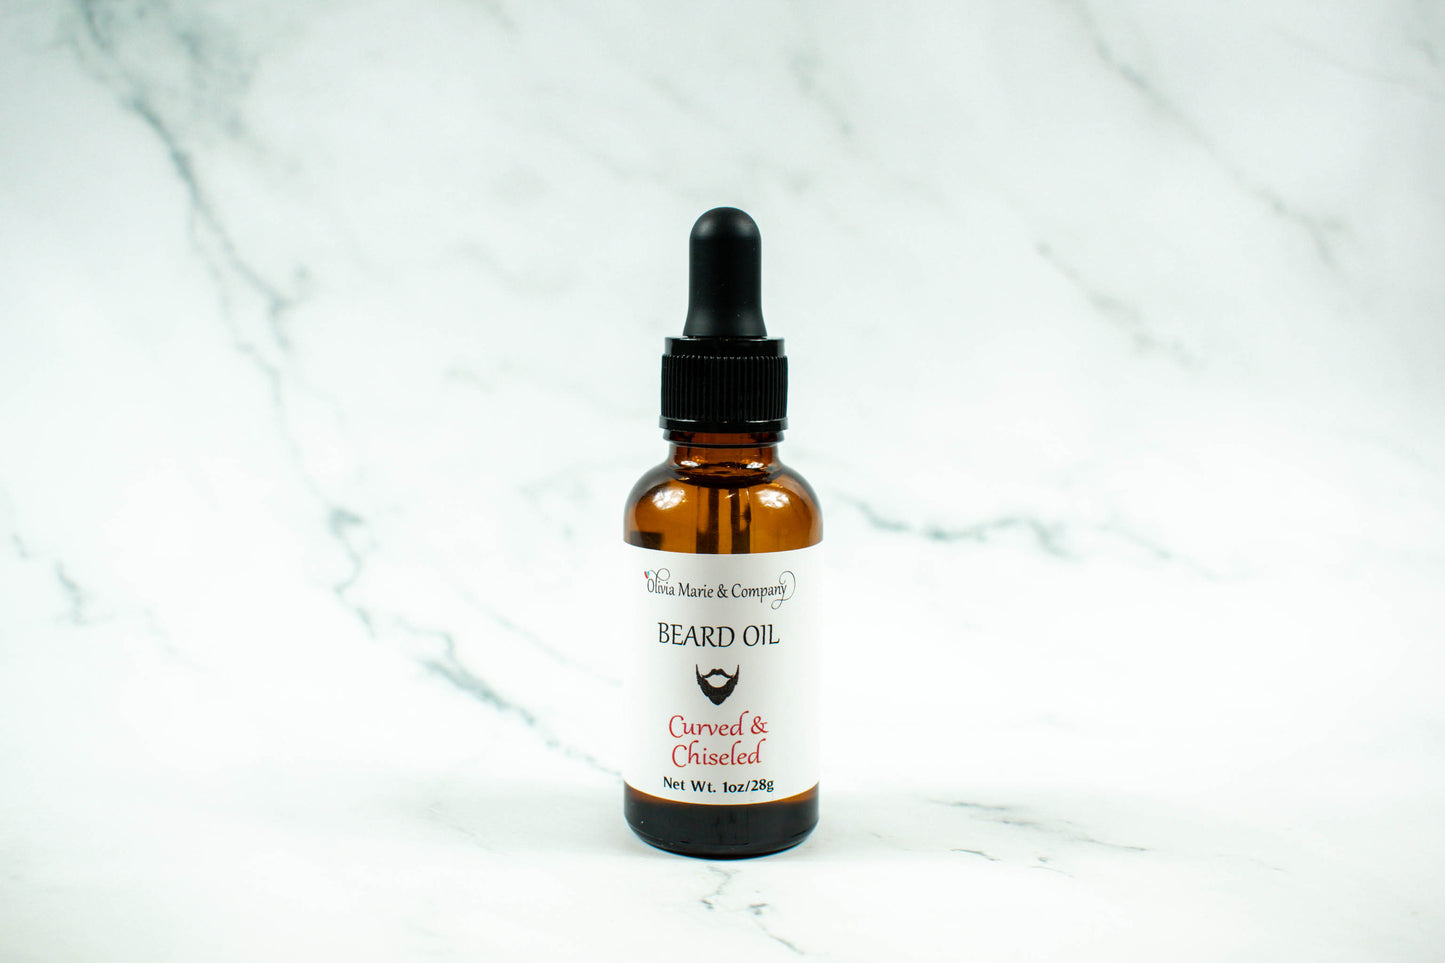 Beard Oil - Curved & Chiseled